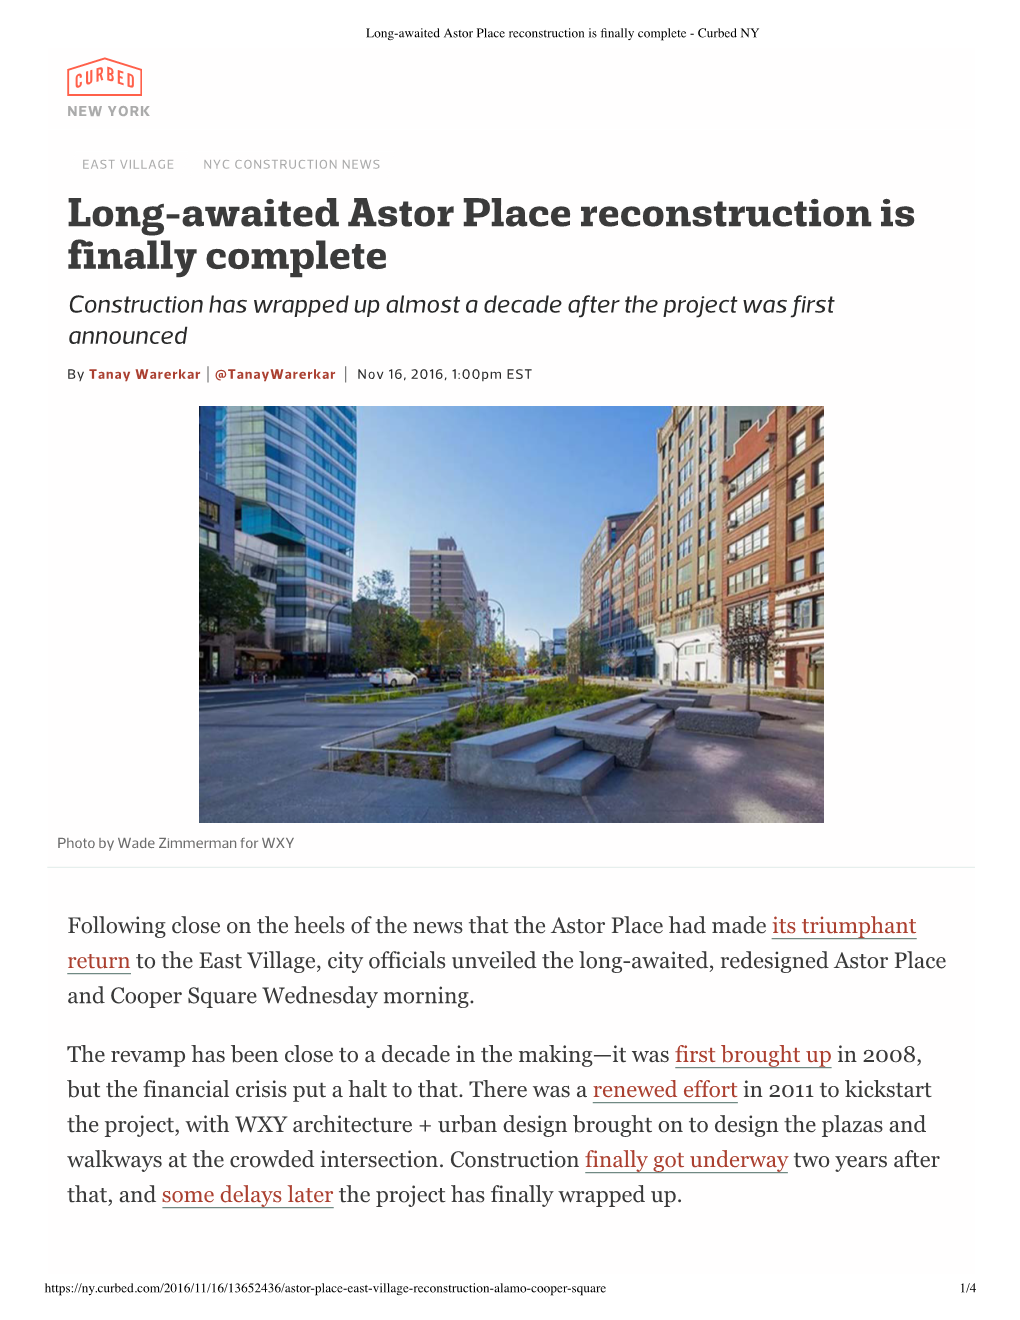 Long-Awaited Astor Place Reconstruction Is Finally Complete Construction Has Wrapped up Almost a Decade After the Project Was First Announced